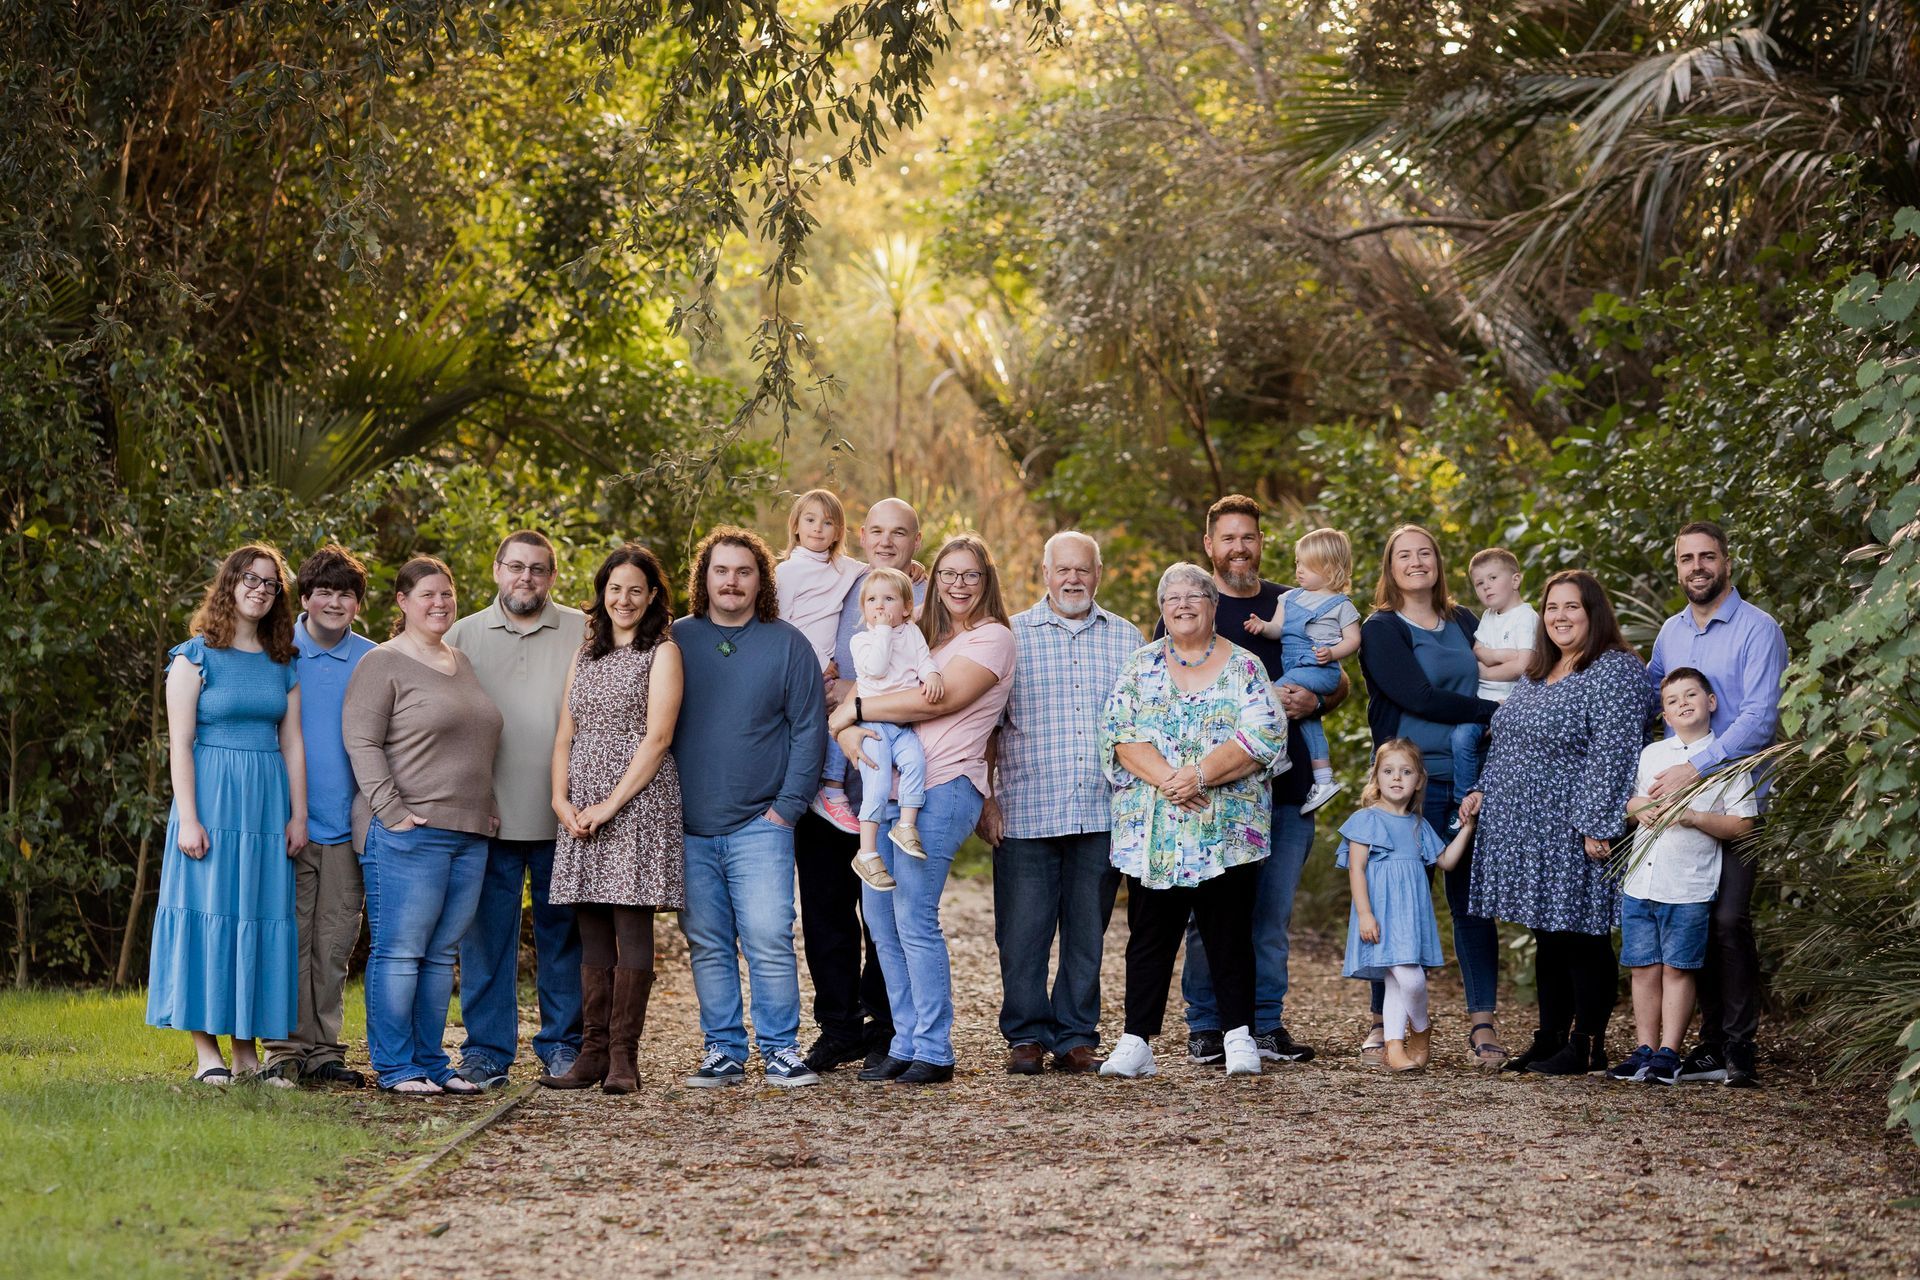 Extended family posing for a portrait in a garden at sunset